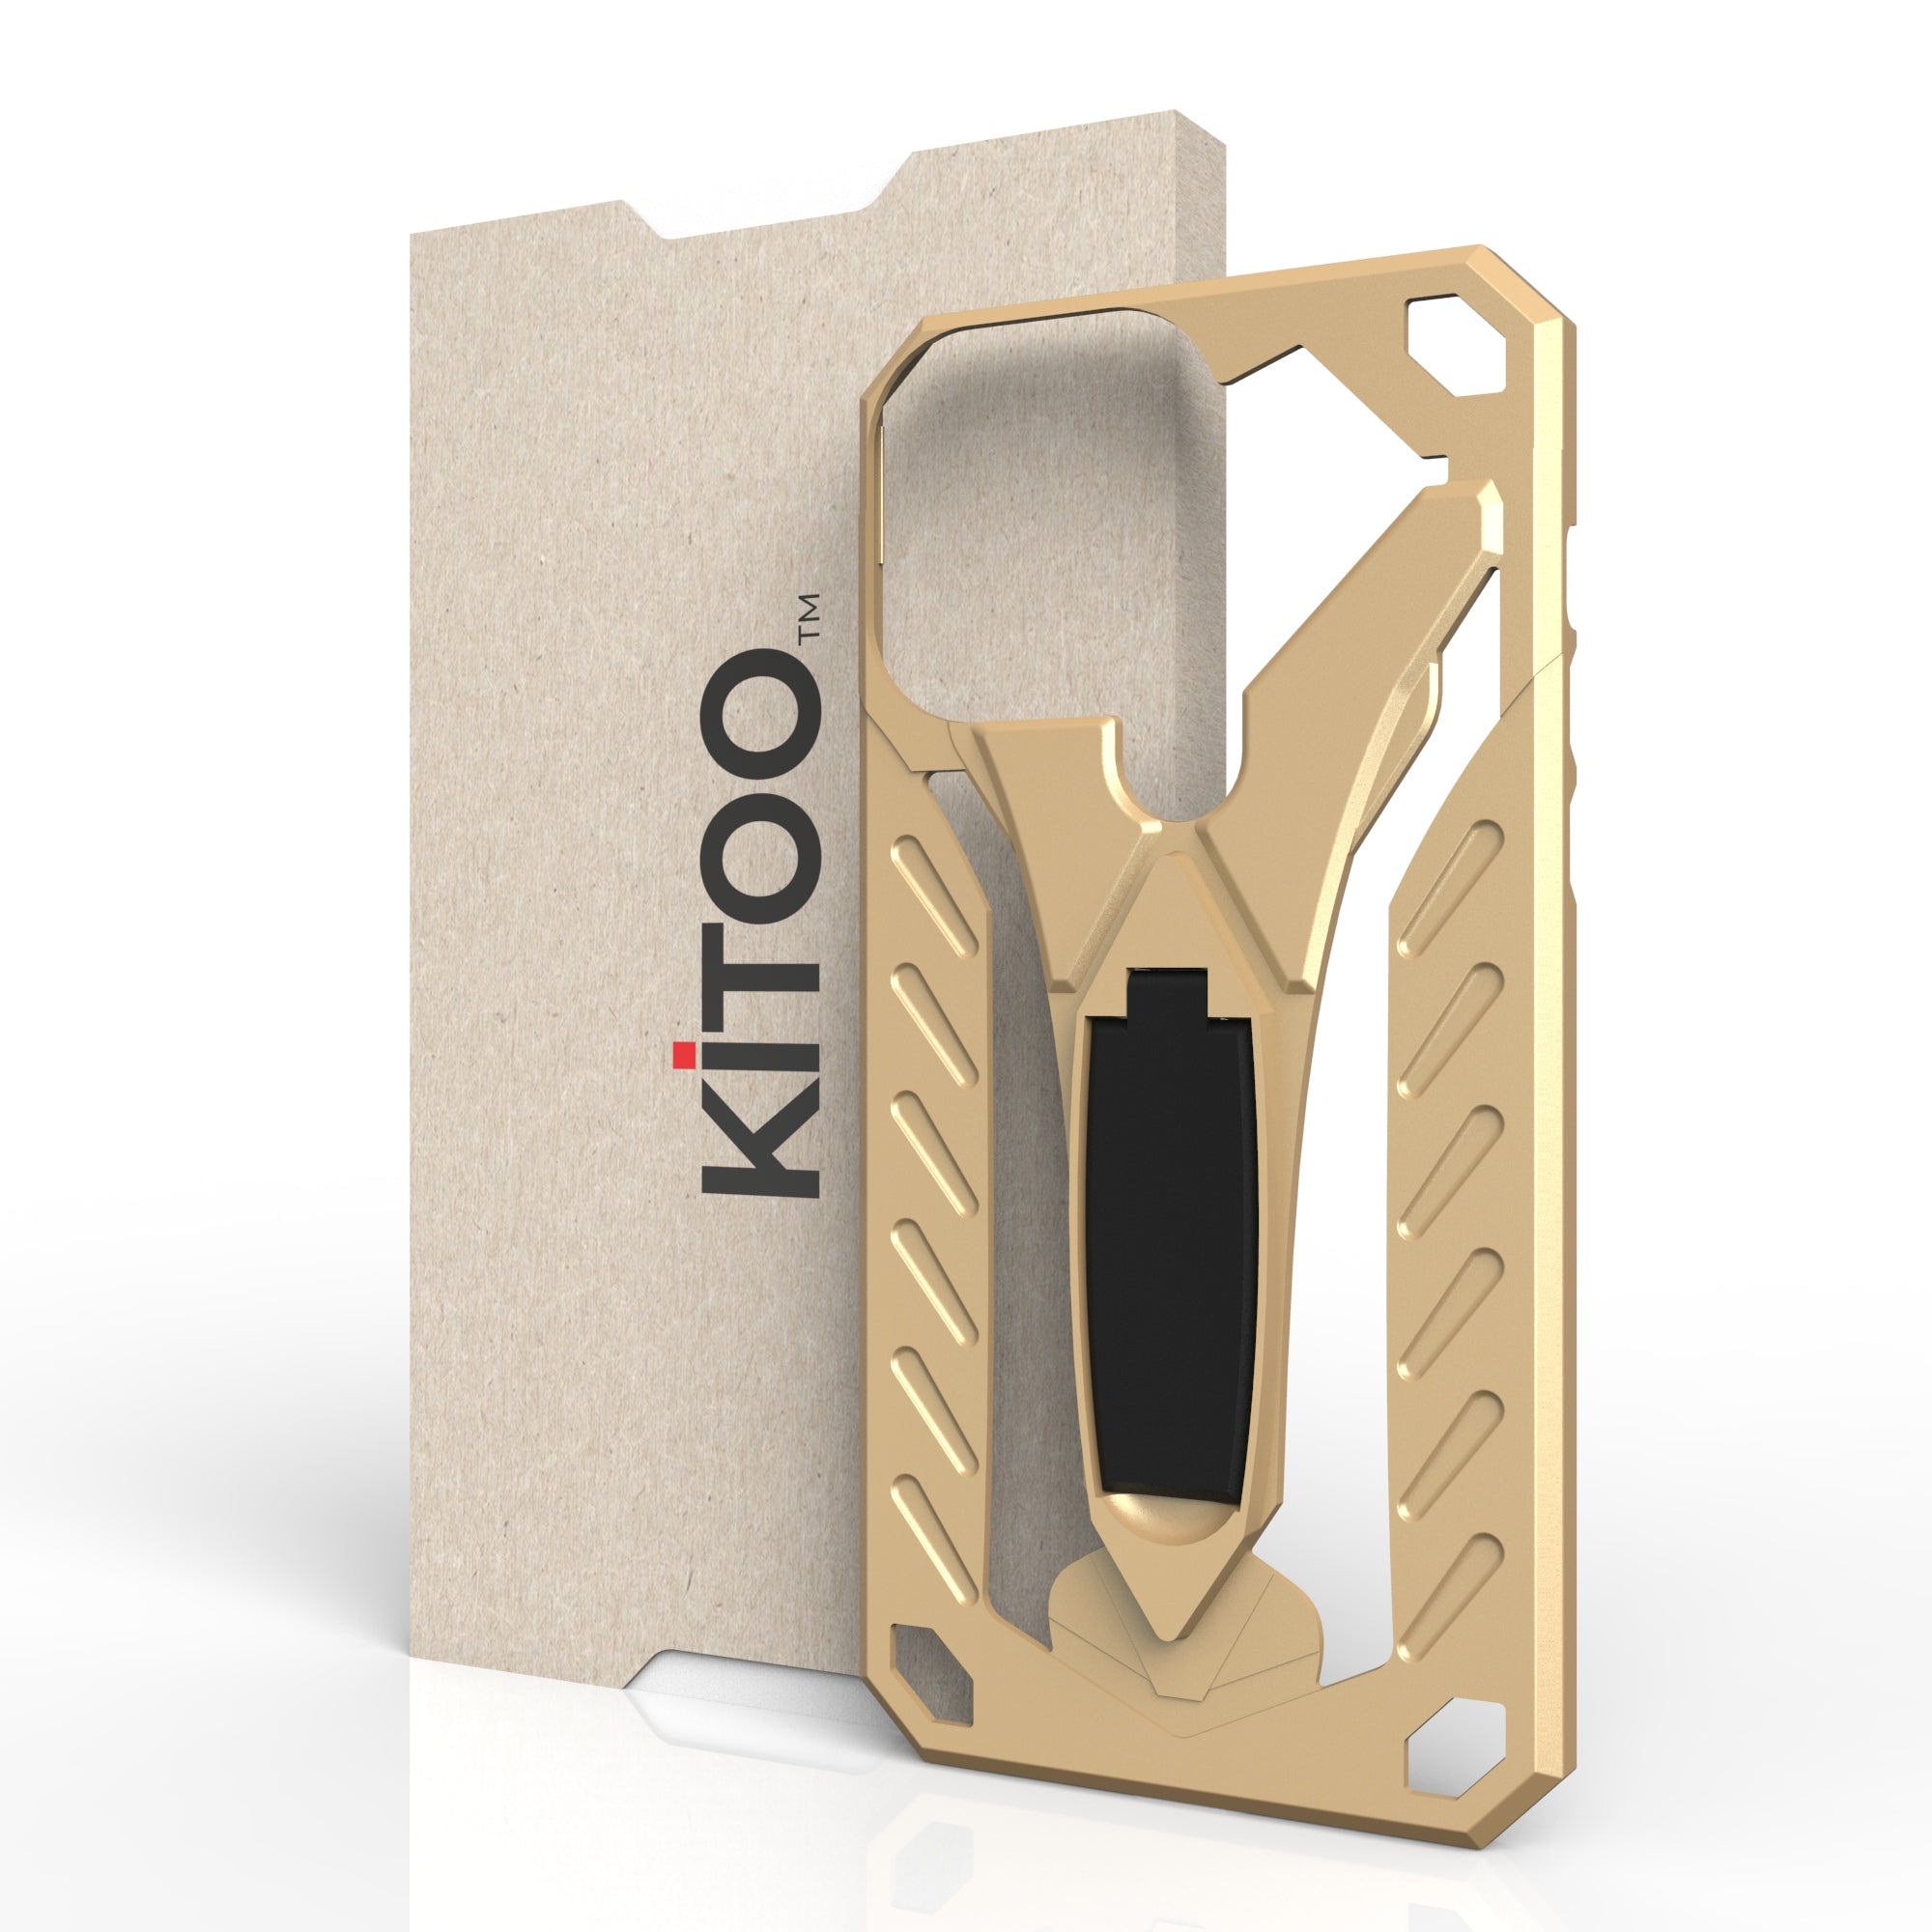 Kitoo Kiсkstand Panel Designed for iPhone 13 Pro Max case (Spare Part only) - Golden